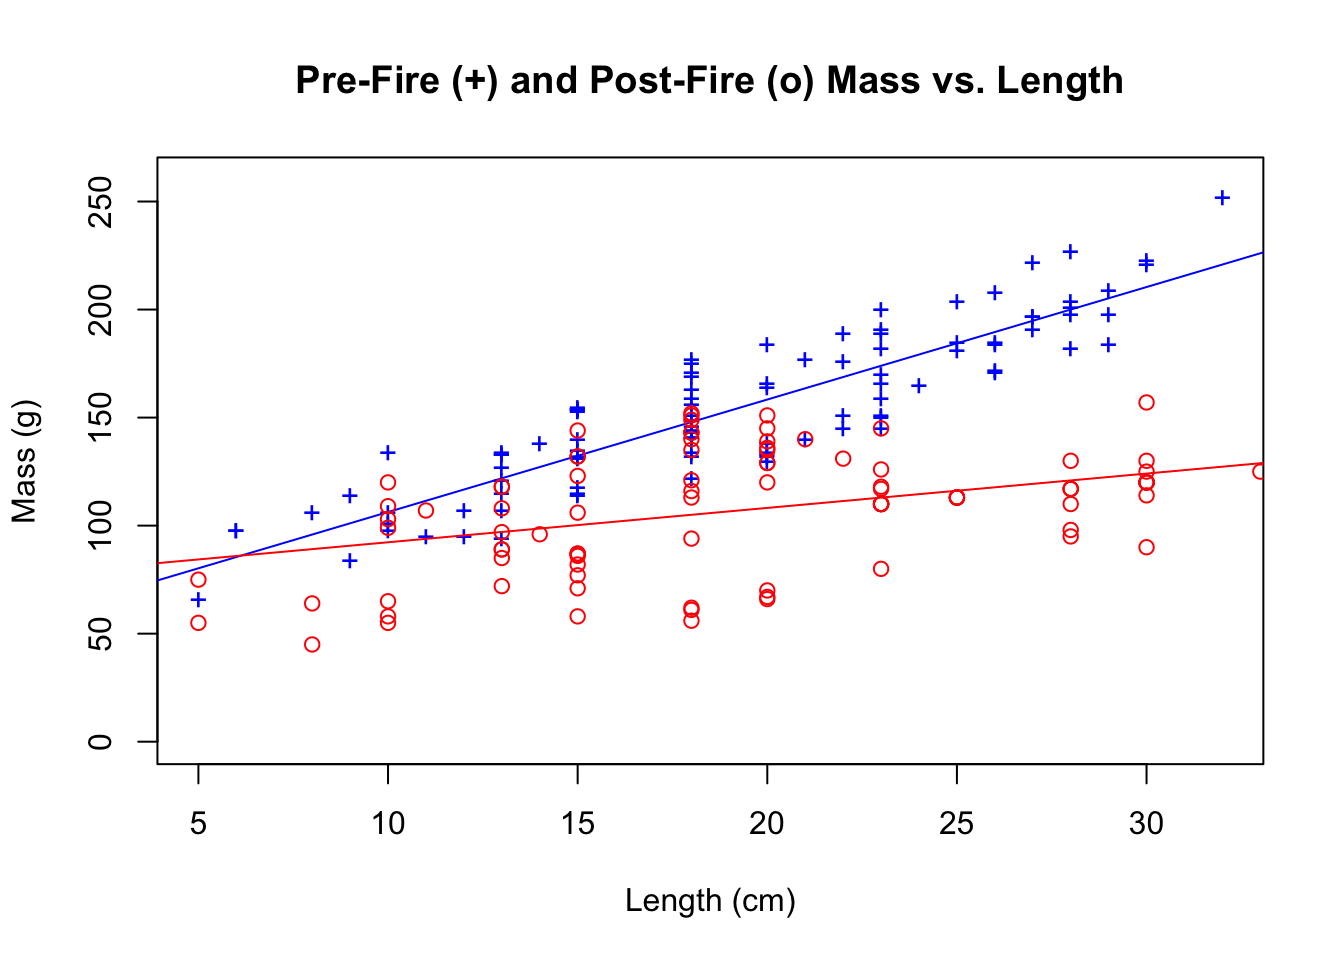 Scatterplot and linear regression line of fish length in centimeters versus fish mass in grams in Cache La Poudre in 2012 before the High Park Fire (blue, +) and in 2013 after the High Park Fire (red, o).